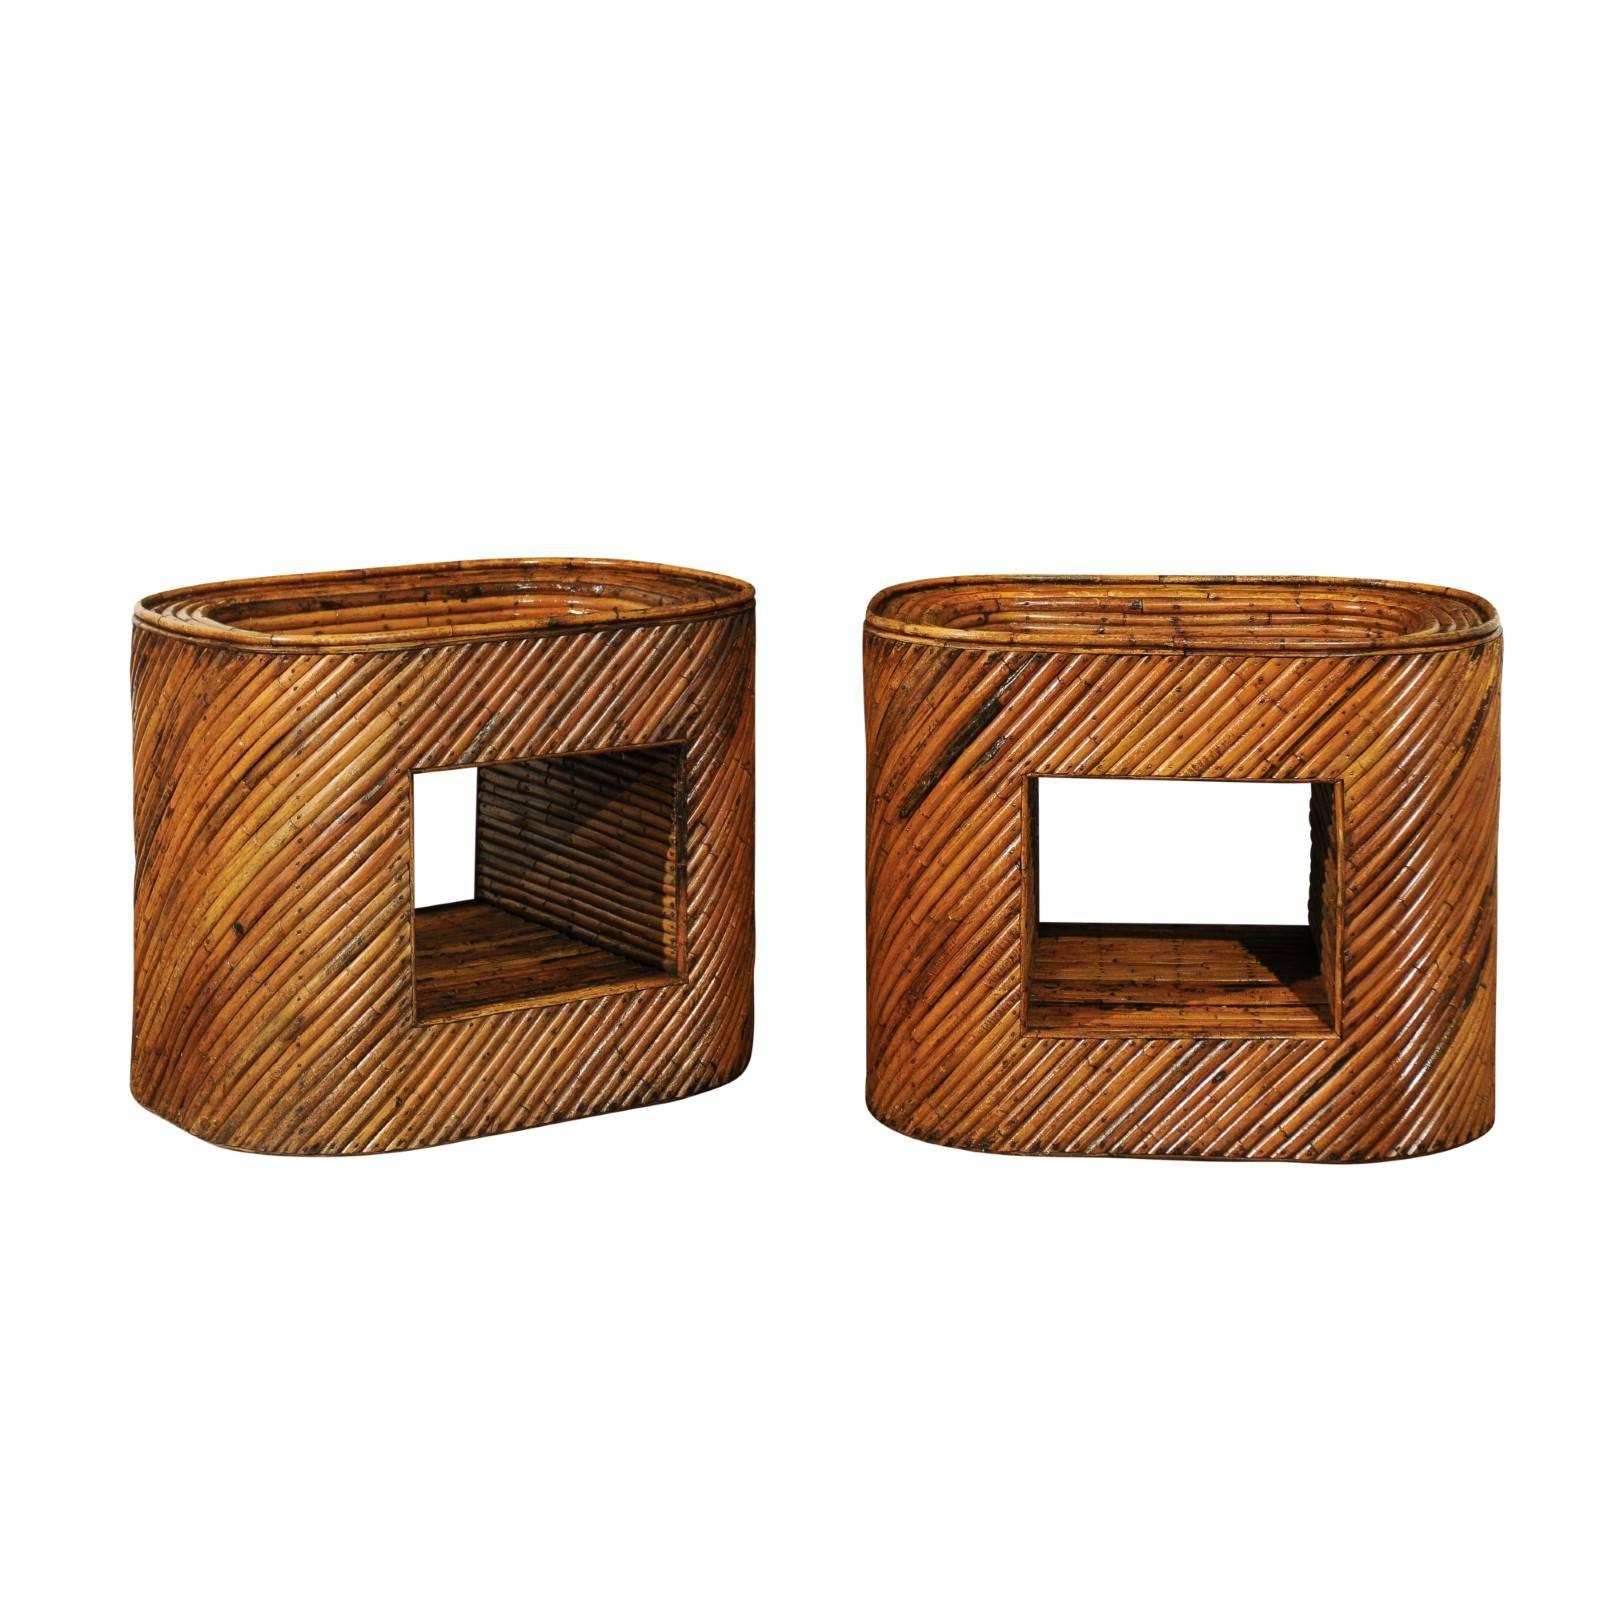 Exceptional Restored Pair of Bamboo Display End Tables, circa 1975 For Sale